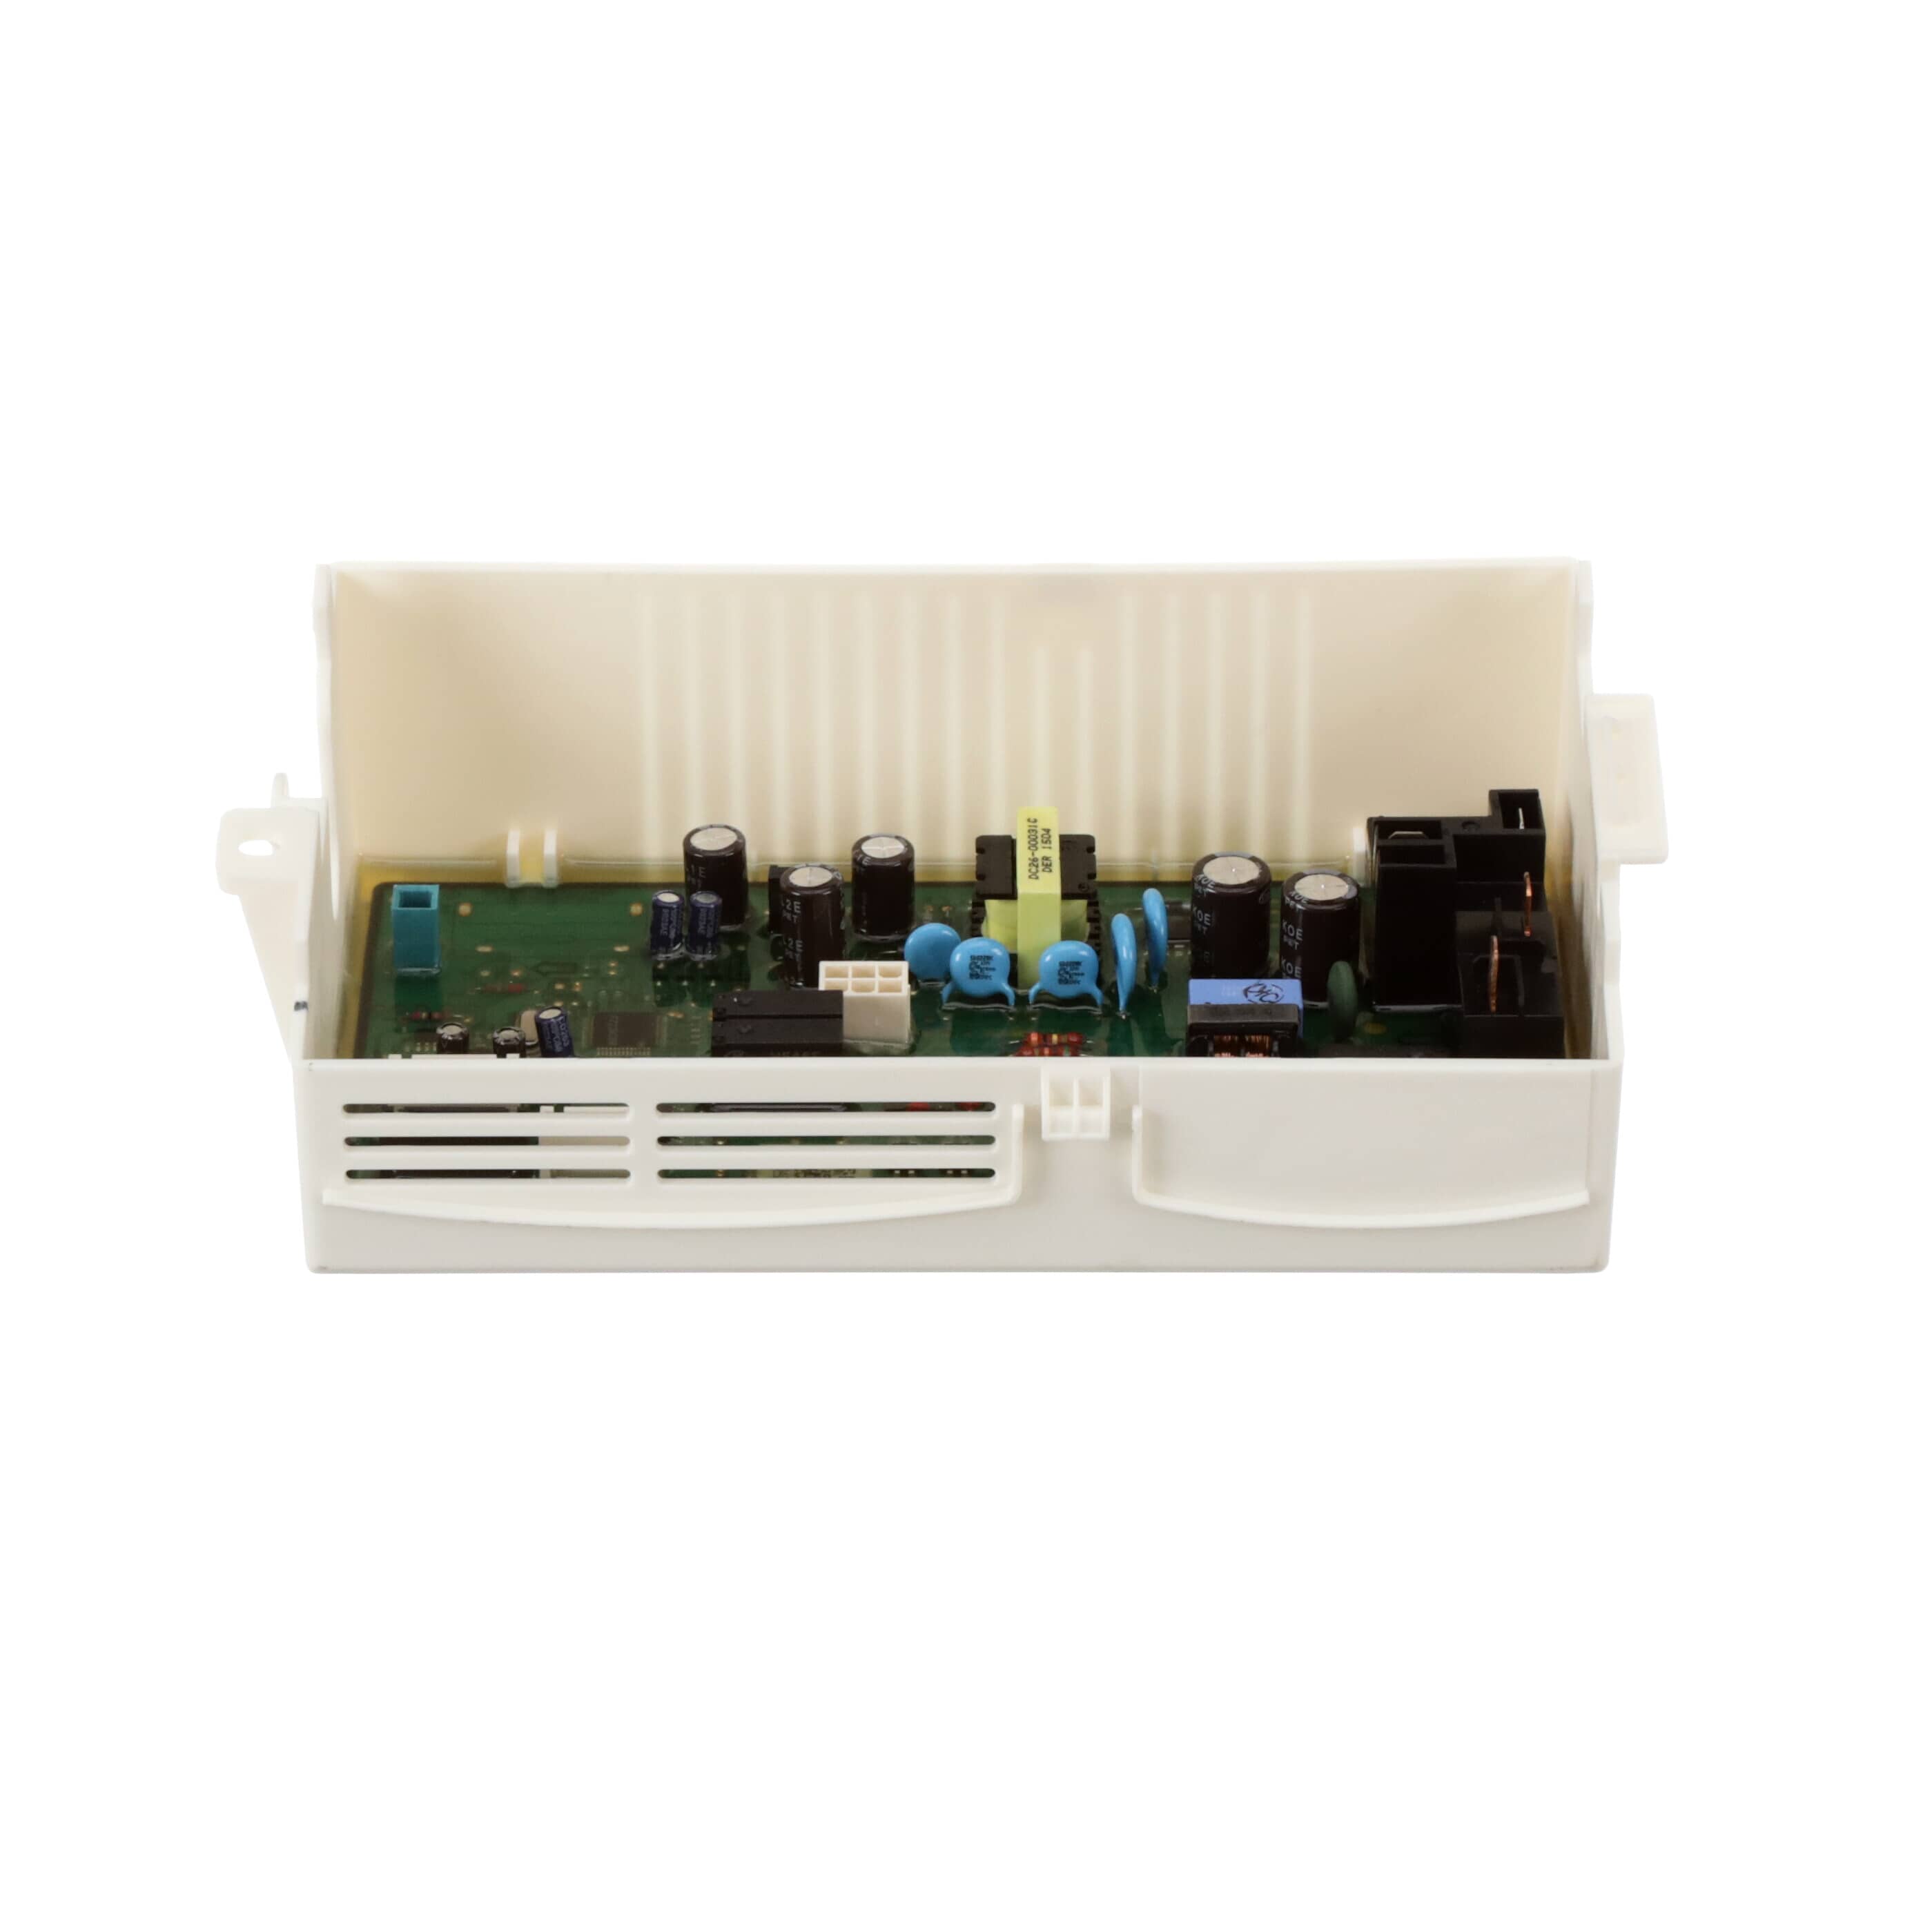 Samsung DC92-01310A Dryer Electronic Control Board - Samsung Parts USA